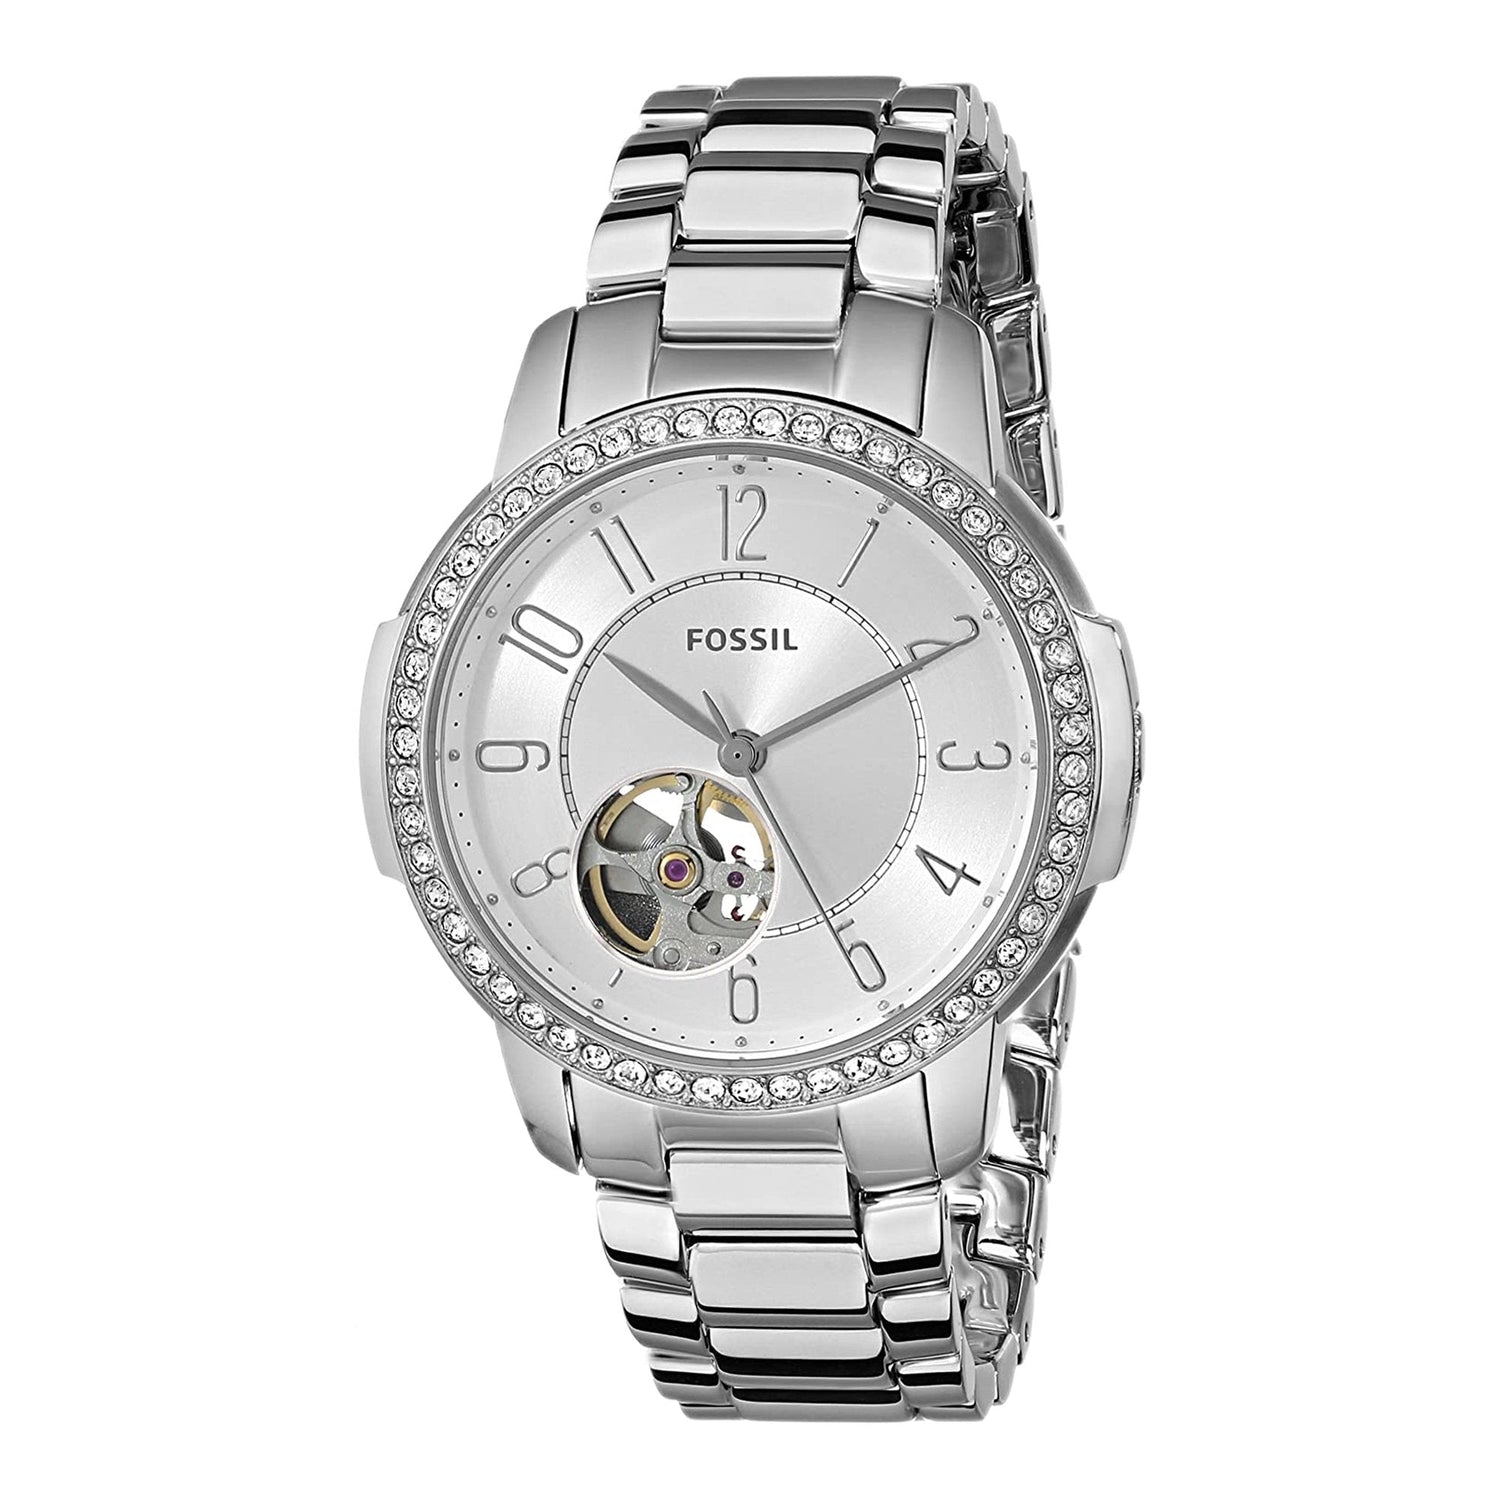 Fossil Architect Automatic Self-Wind Stainless Steel Women's Watch  ME3057 - Big Daddy Watches